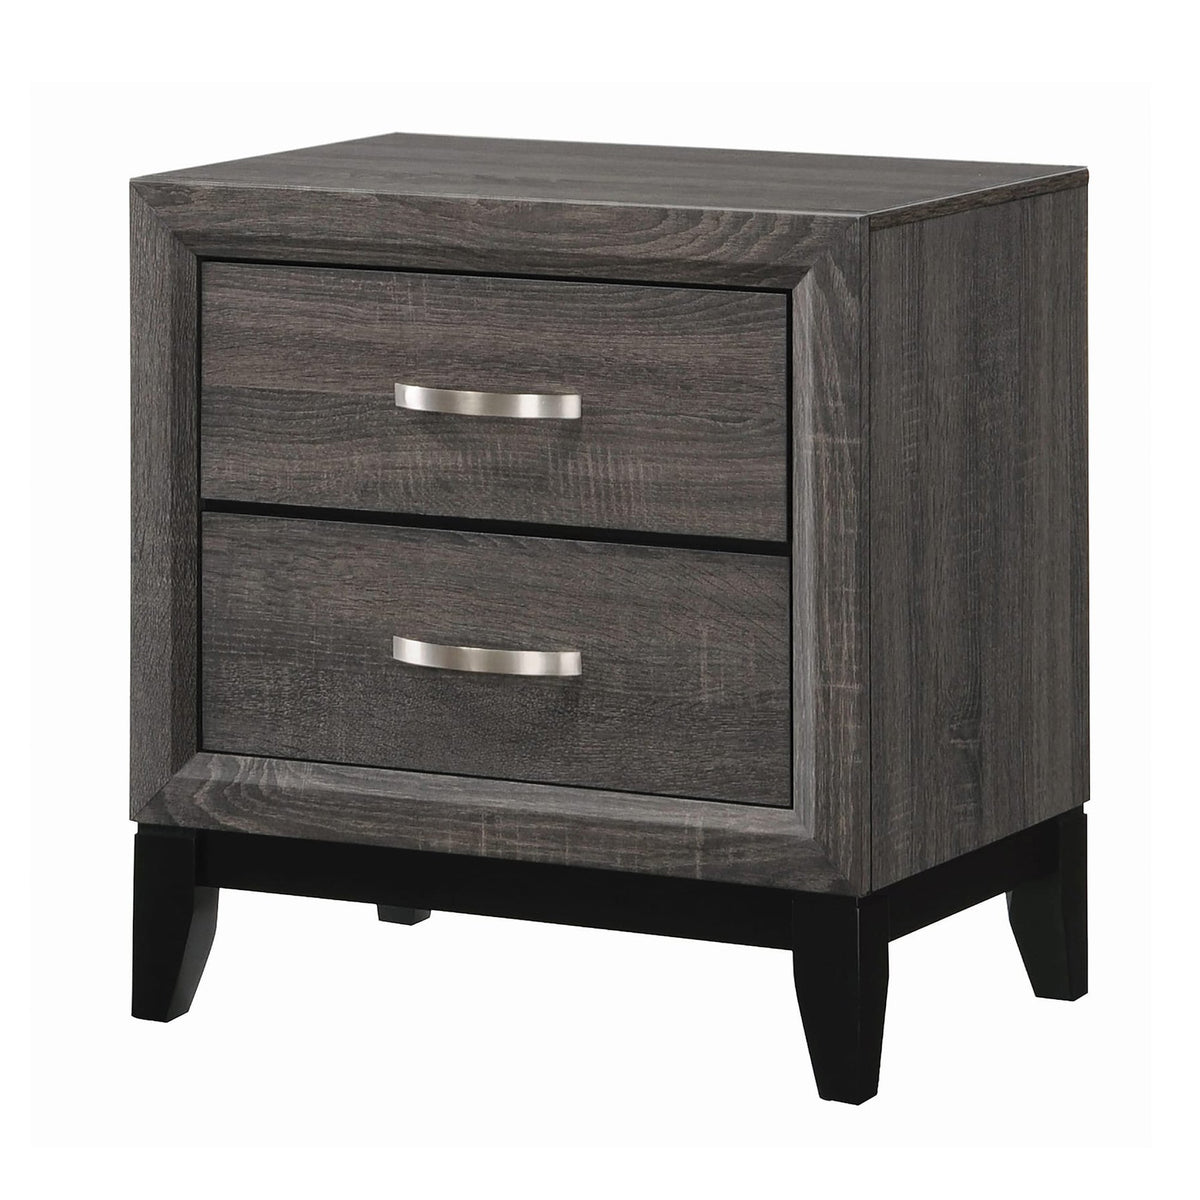 Wooden Nightstand with 2 Drawers and Chamfered legs, Gray and Black - BM206518